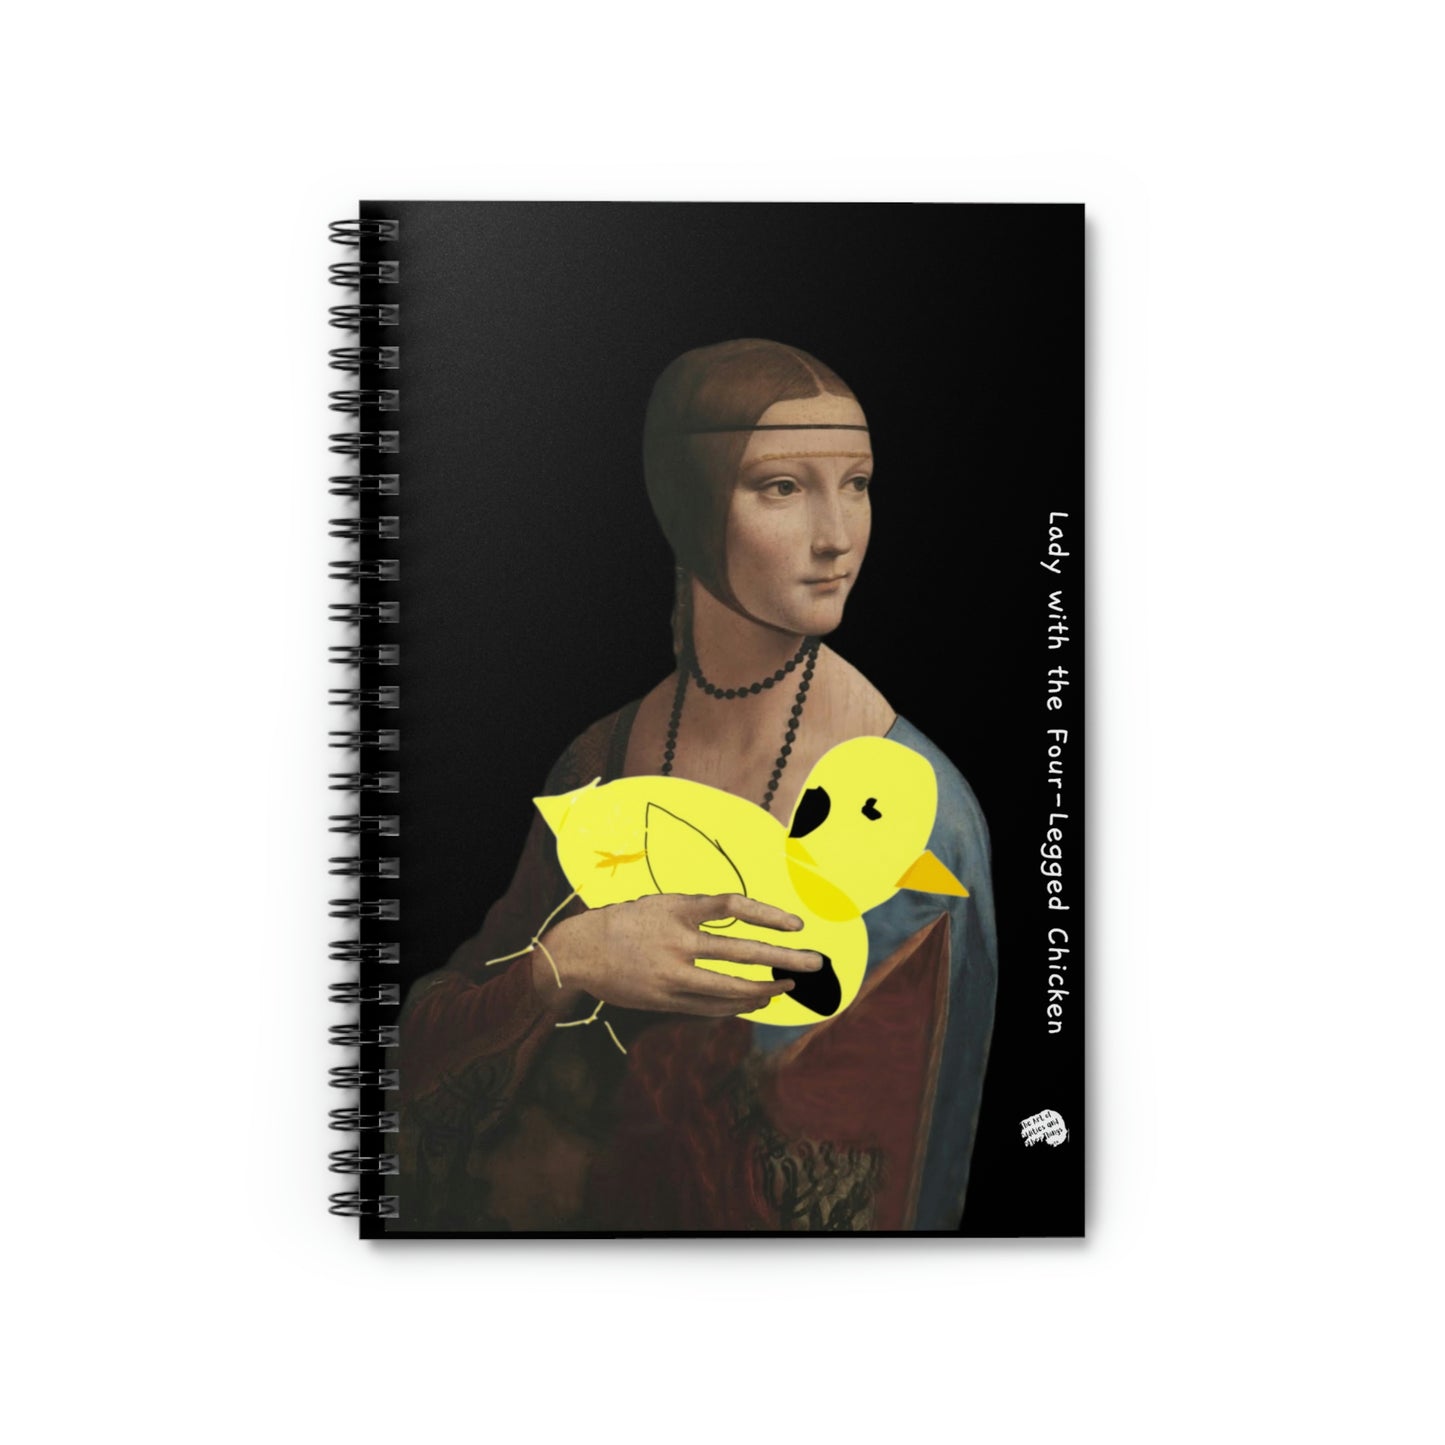 Spiral Notebook - Ruled Line with Lady with the Four-Legged Chicken print by D.B.